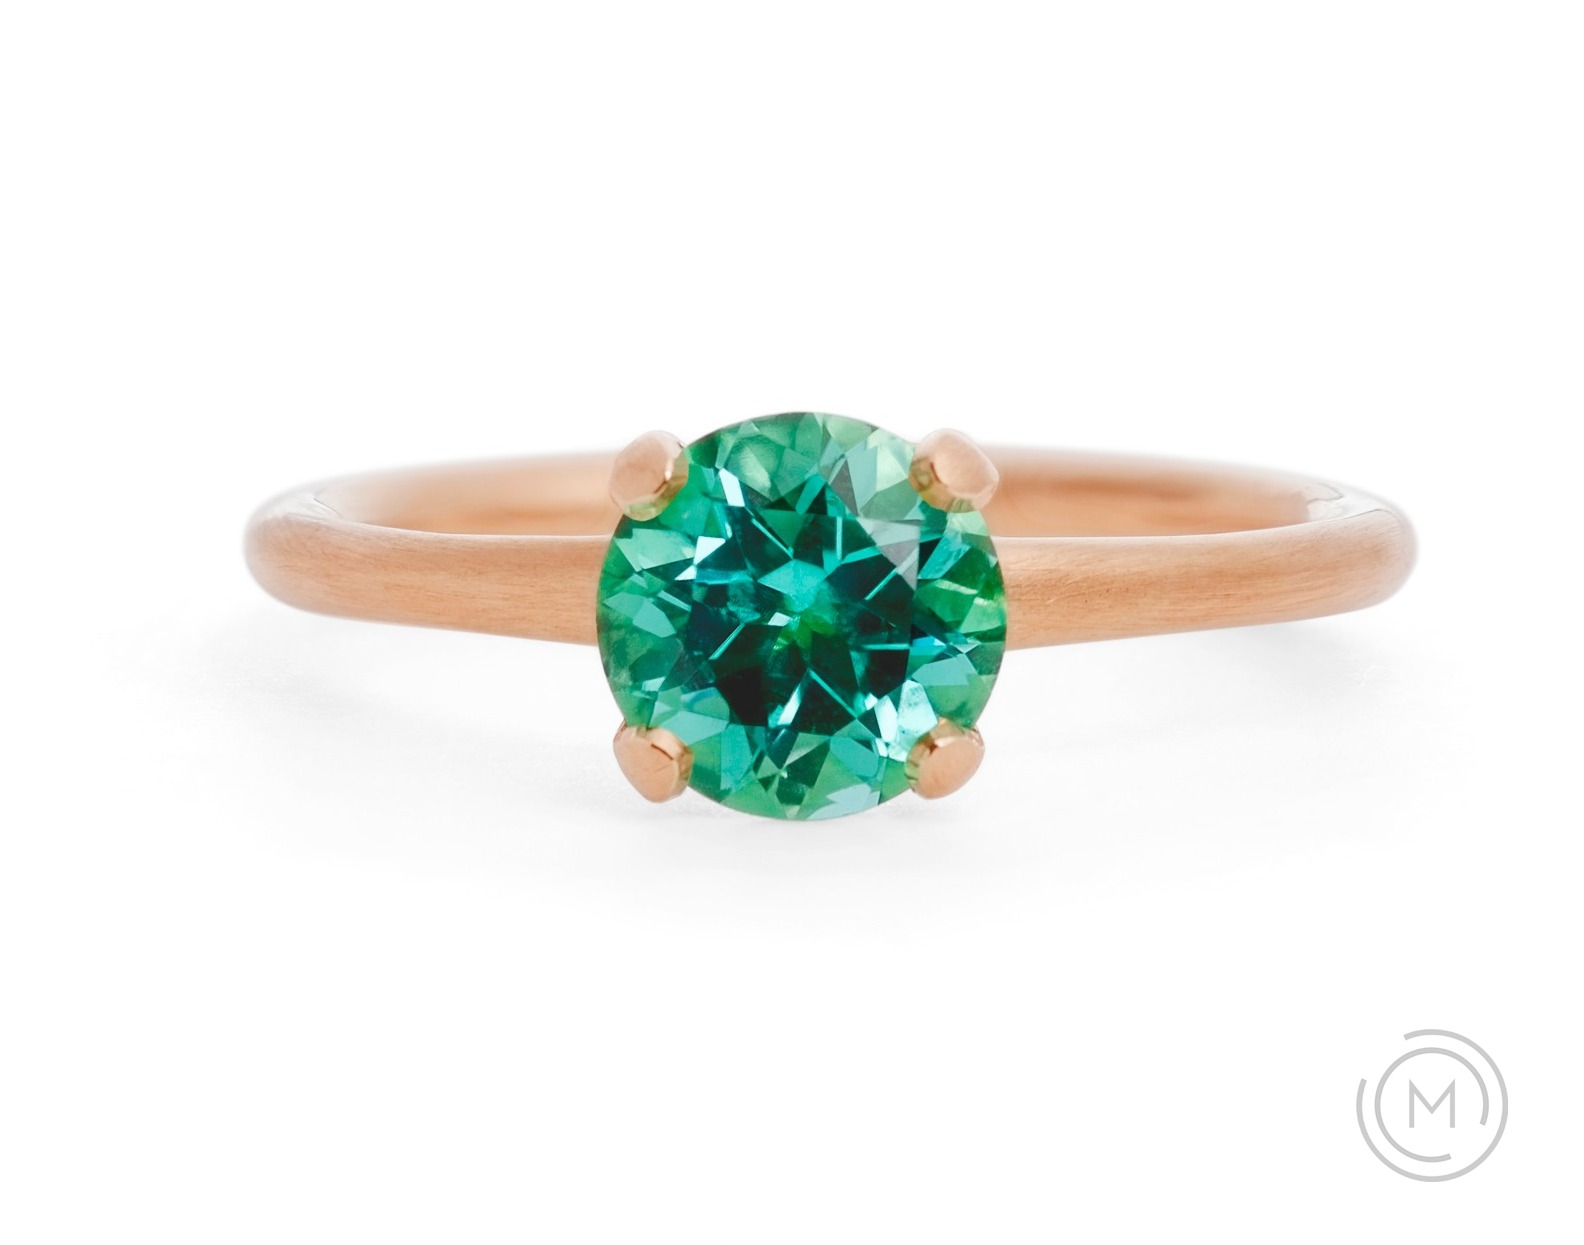 Rose gold and Paraiba tourmaline 4-claw engagement ring